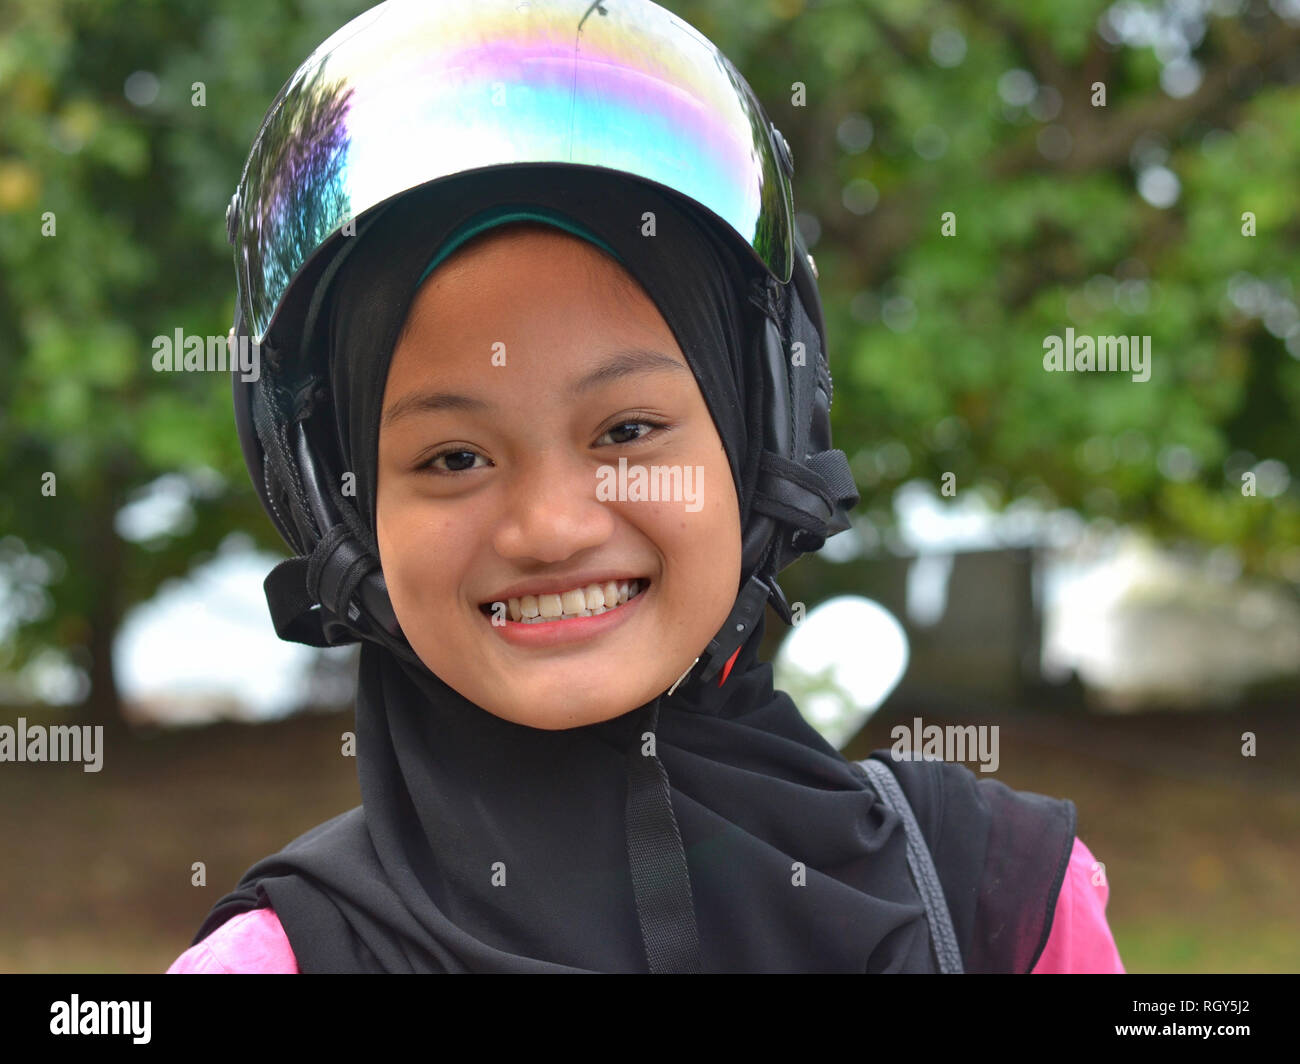 Smiling, pretty Muslim Malay girl wears a modern motorcycle crash helmet over her black traditional hijab. Stock Photo